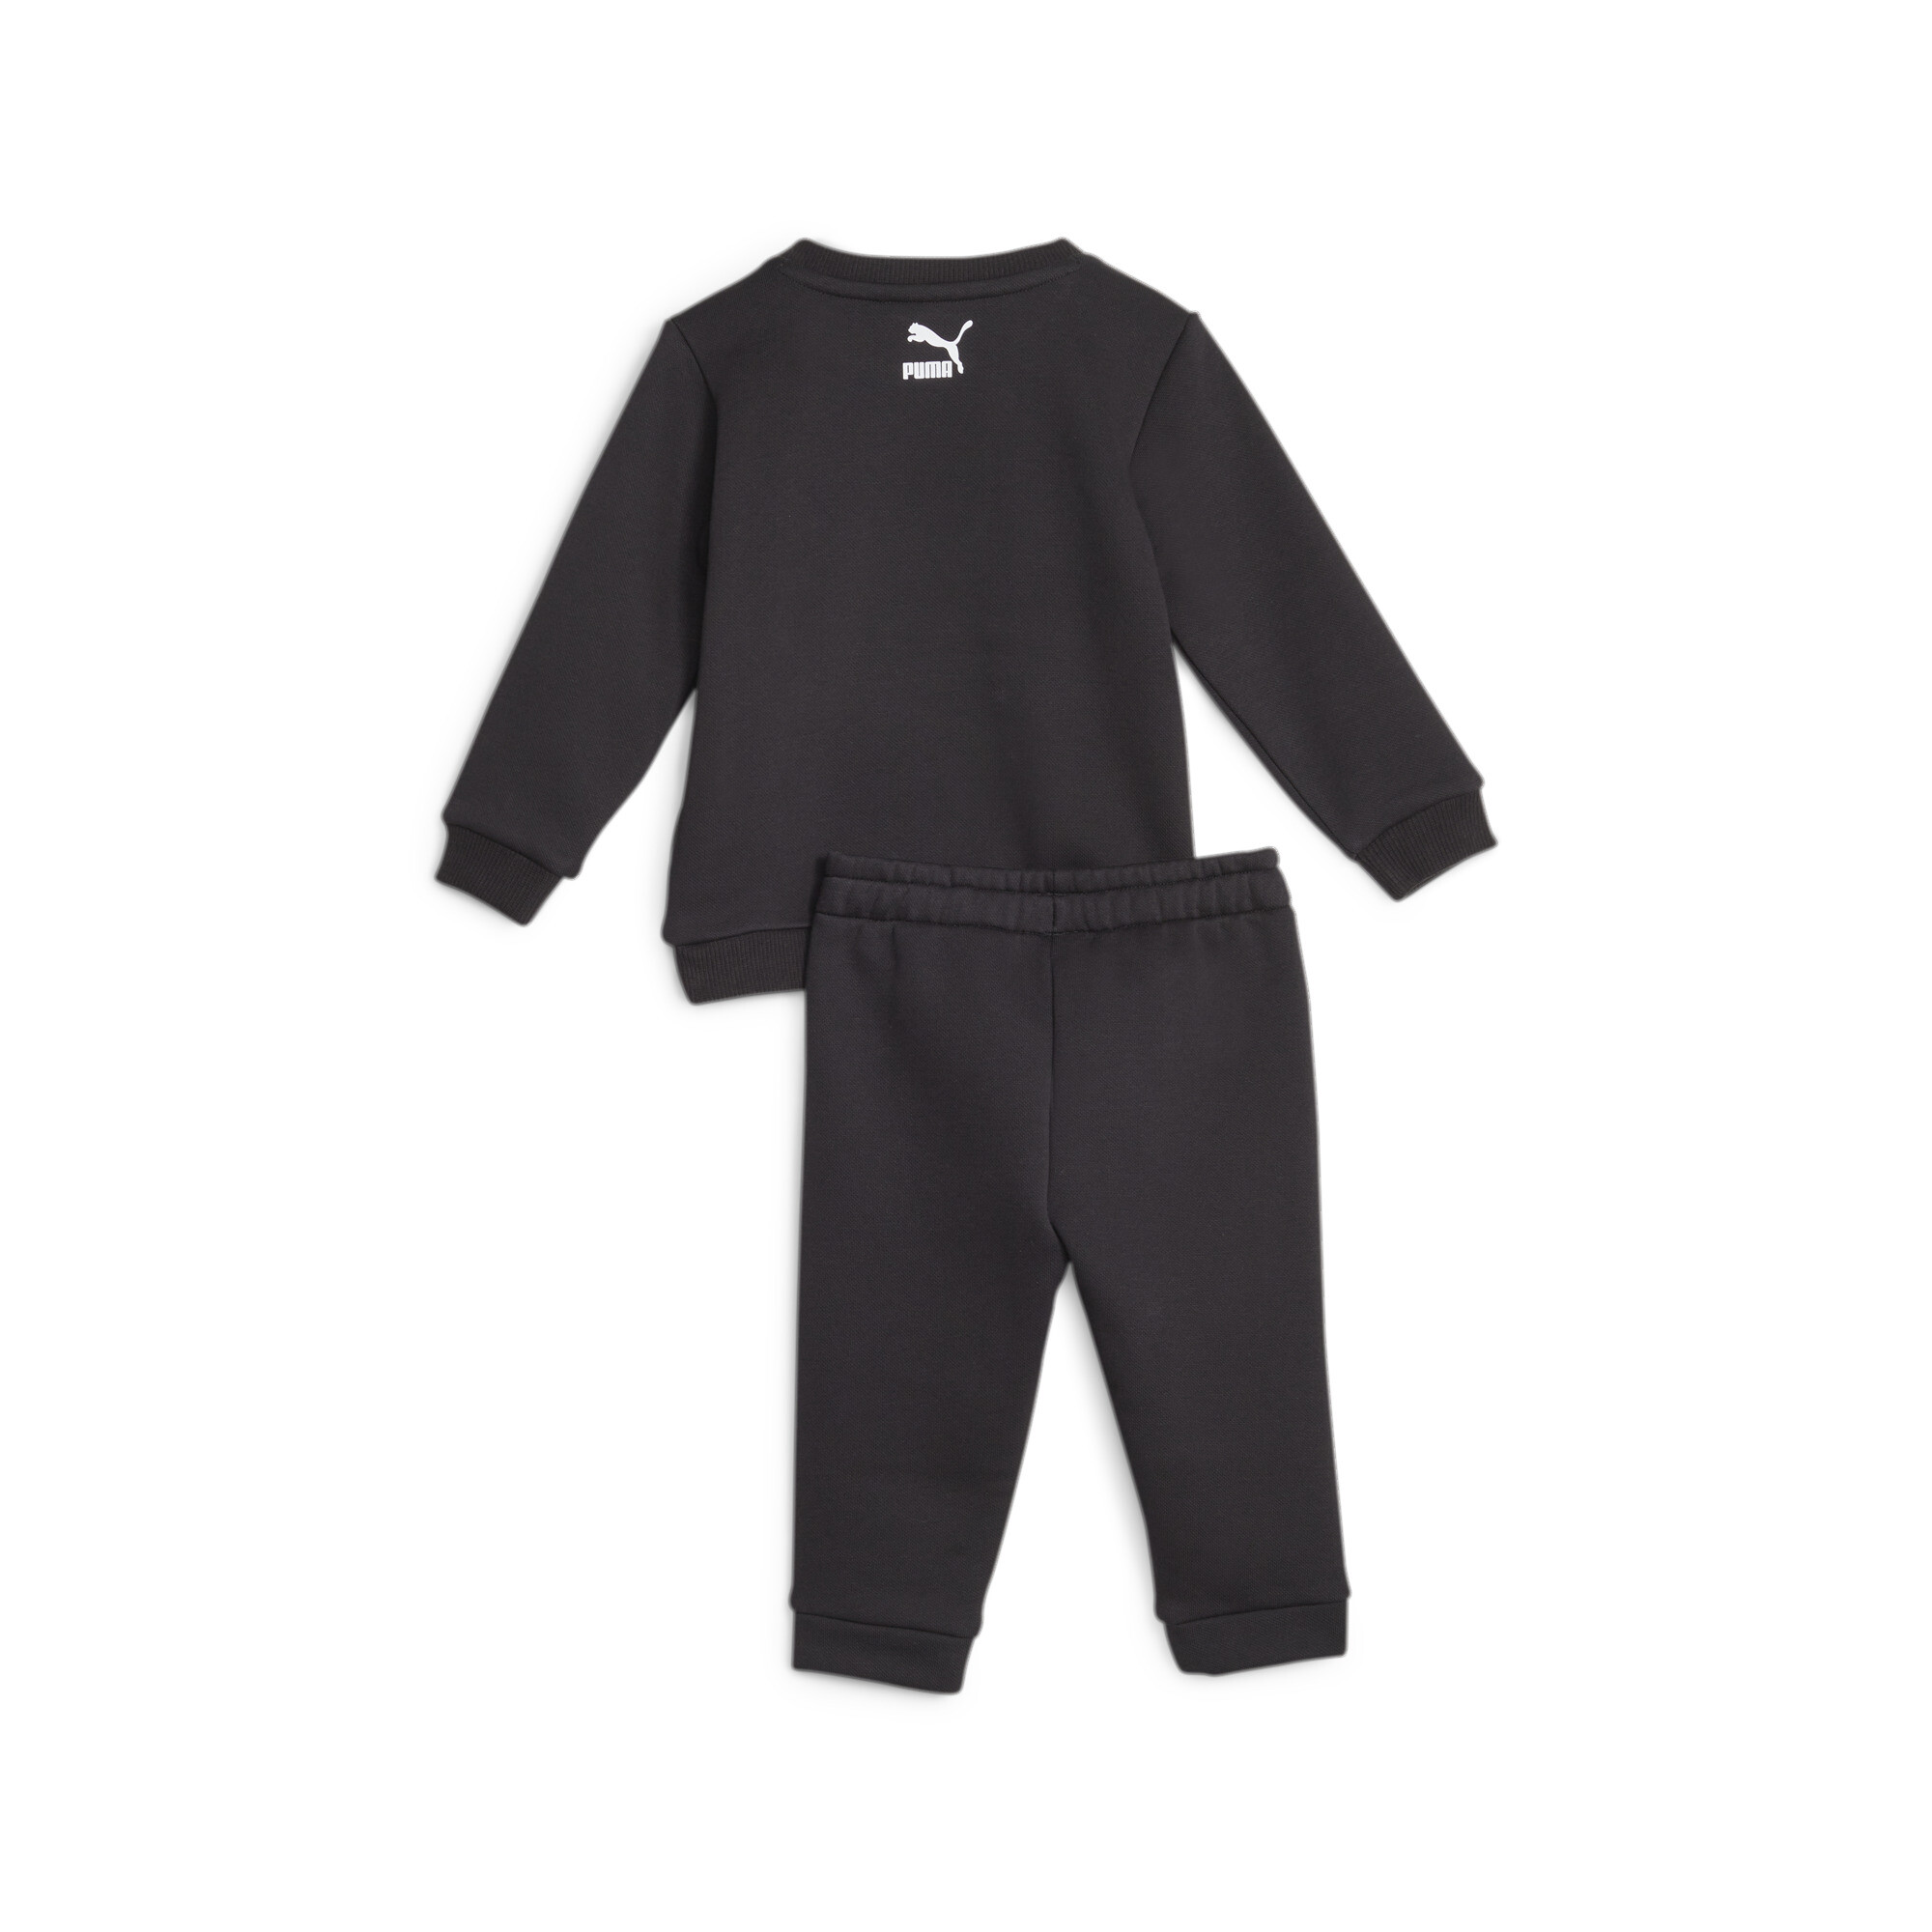 Puma X MIRACULOUS Toddlers' Jogger, Black, Size 9-12M, Clothing